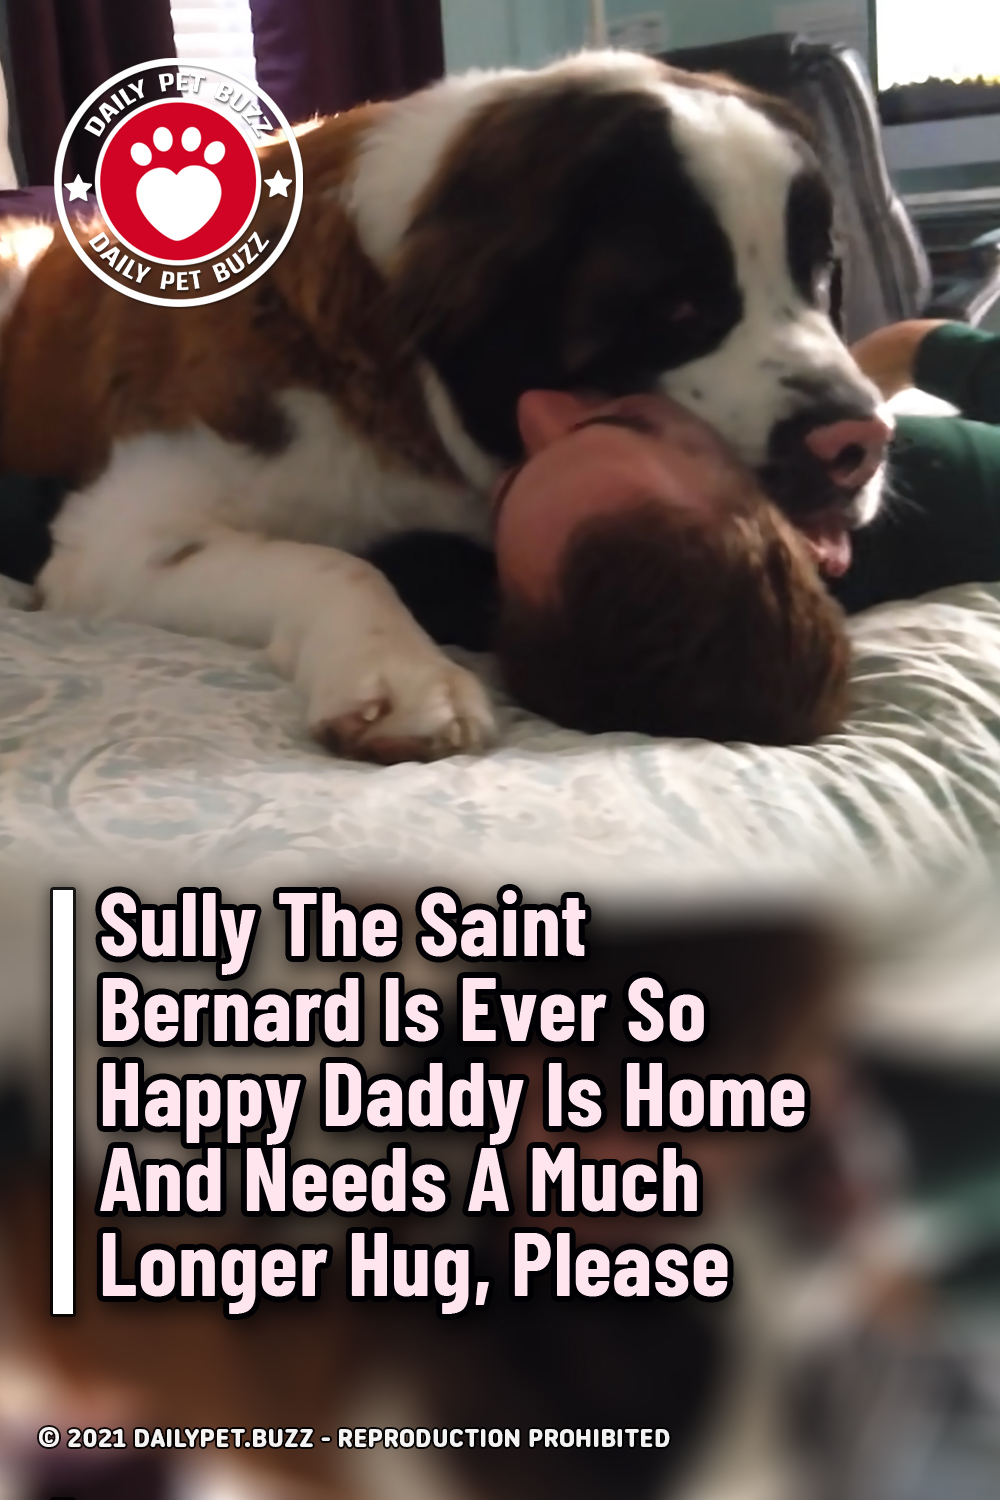 Sully The Saint Bernard Is Ever So Happy Daddy Is Home And Needs A Much Longer Hug, Please